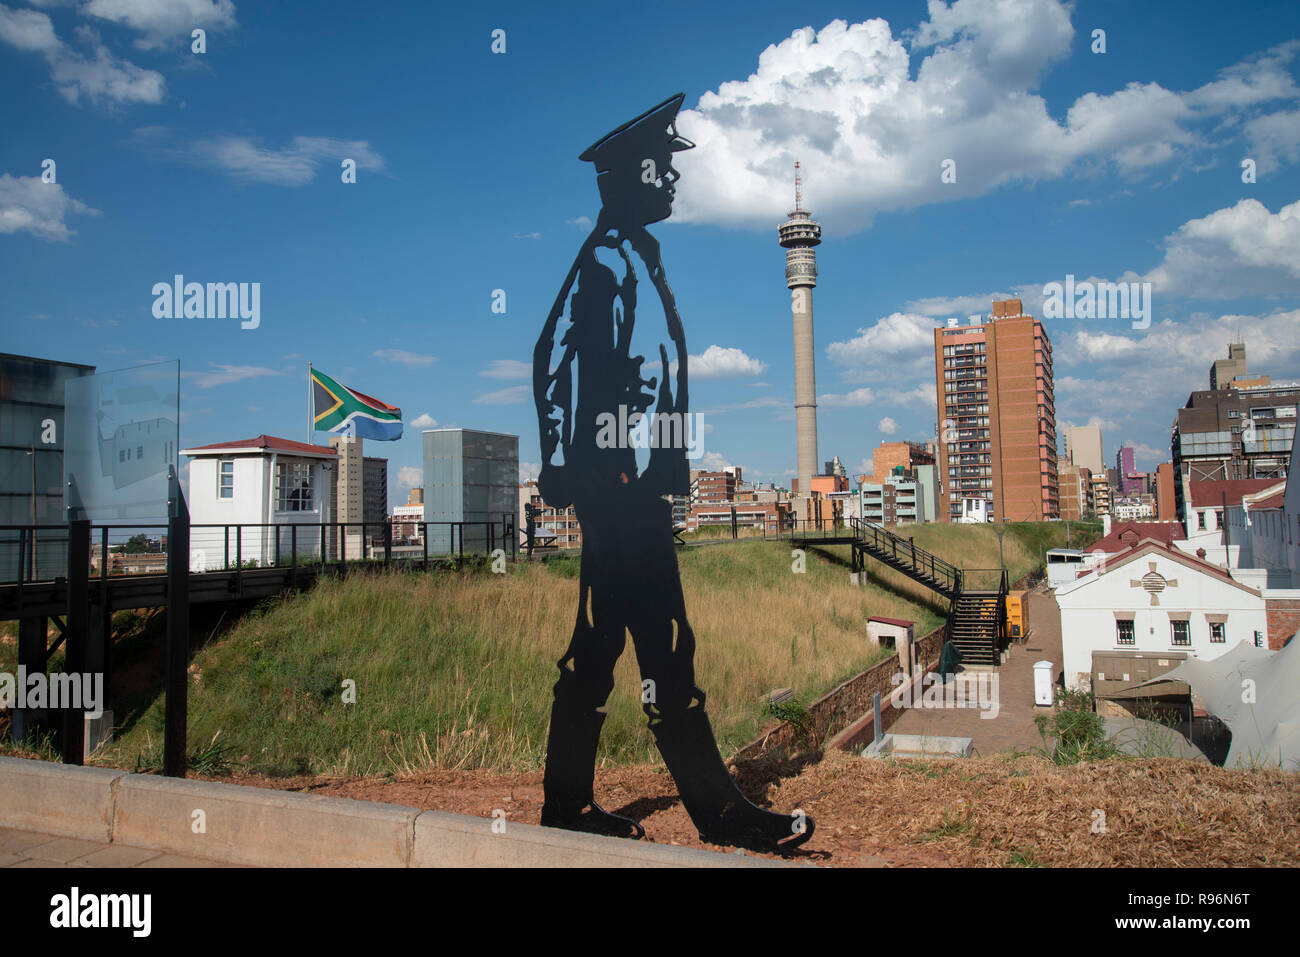 Johannesburg, South Africa, 19 December, 2018. A silhouetted figure keeps guard over the Old Fort on Constitution Hill, as part of a new permanent exhibition there. Using technology such as holograms, the new exhibition additions officially opened in December, telling the stories about prisoners who were housed here, both during the gold rush and later during apartheid. During apartheid, The Old Fort housed white prisoners. Prison guards and soldiers also feature in the exhibition as the Old Fort was a military garrison during the Anglo-Boer War. Credit: Eva-Lotta Jansson Stock Photo